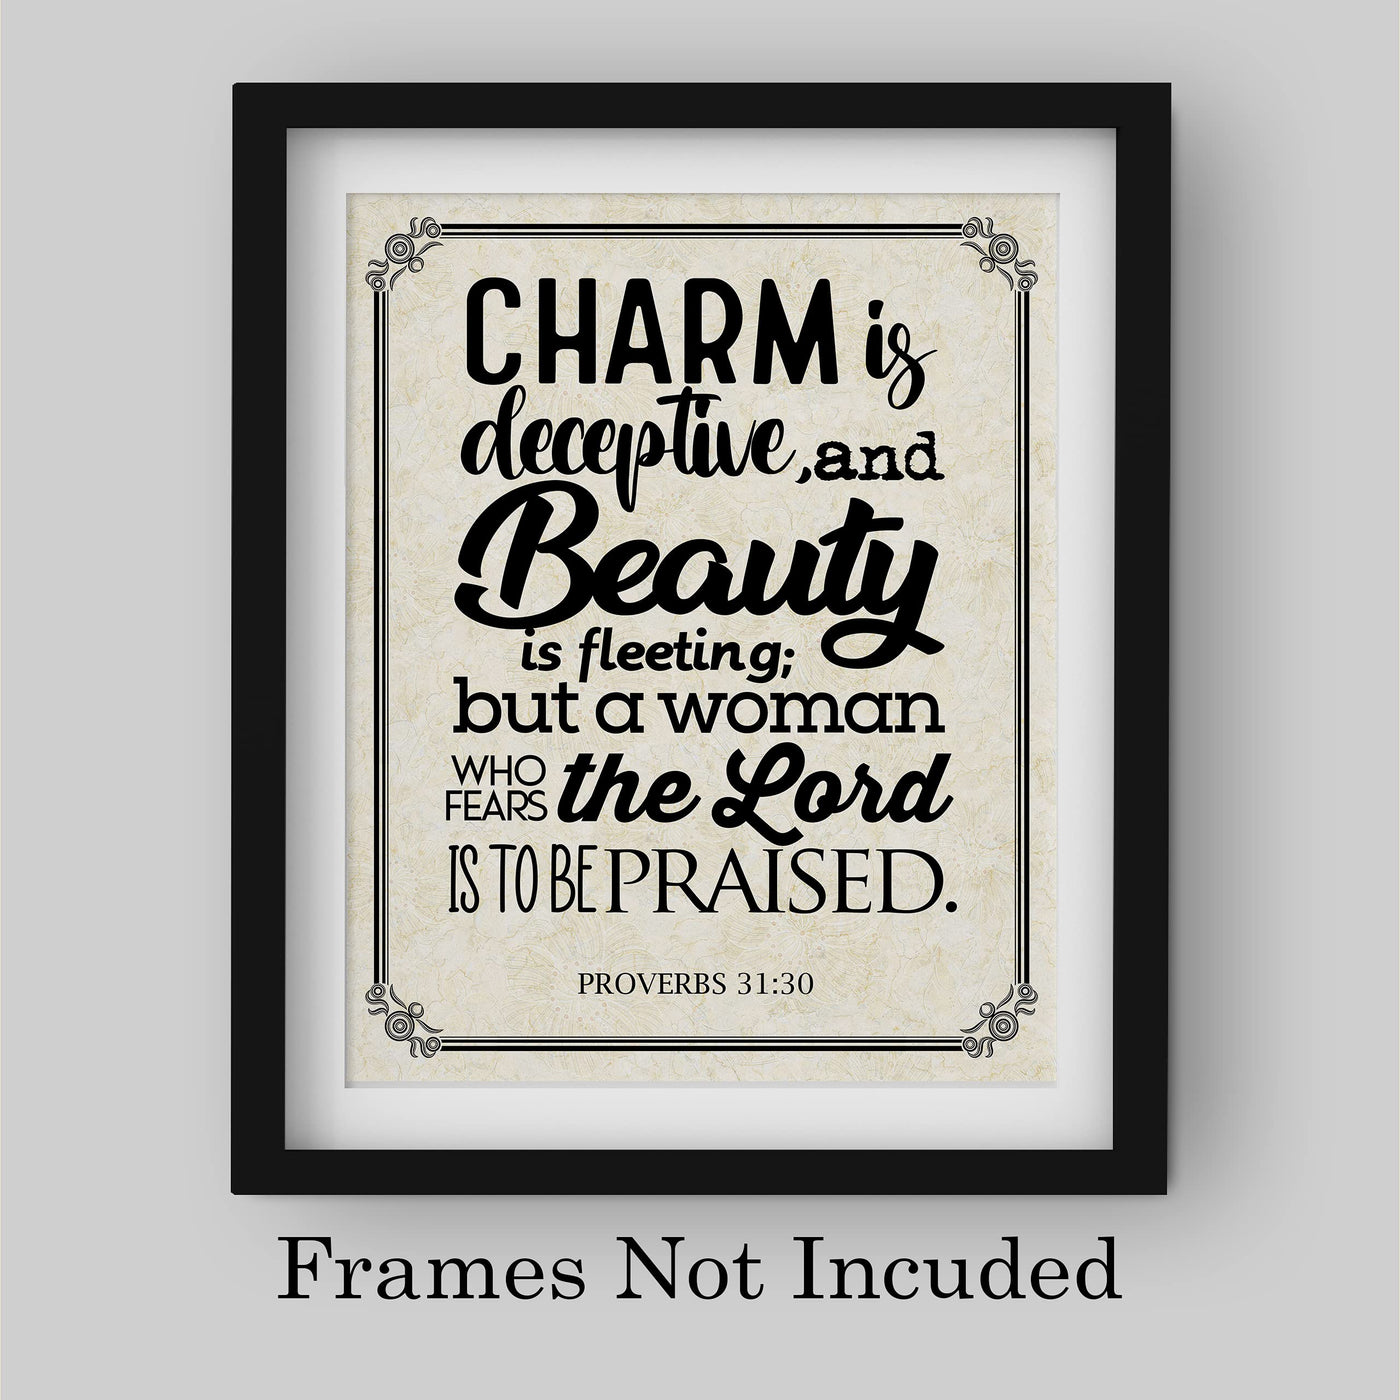 Beauty Is Fleeting-Woman Who Fears the Lord-To Be Praised-Proverbs 31:30 Bible Verse Wall Art- 8x10"-Scripture Print-Ready to Frame. Inspirational Home-Office-Church Decor. Great Christian Gift!